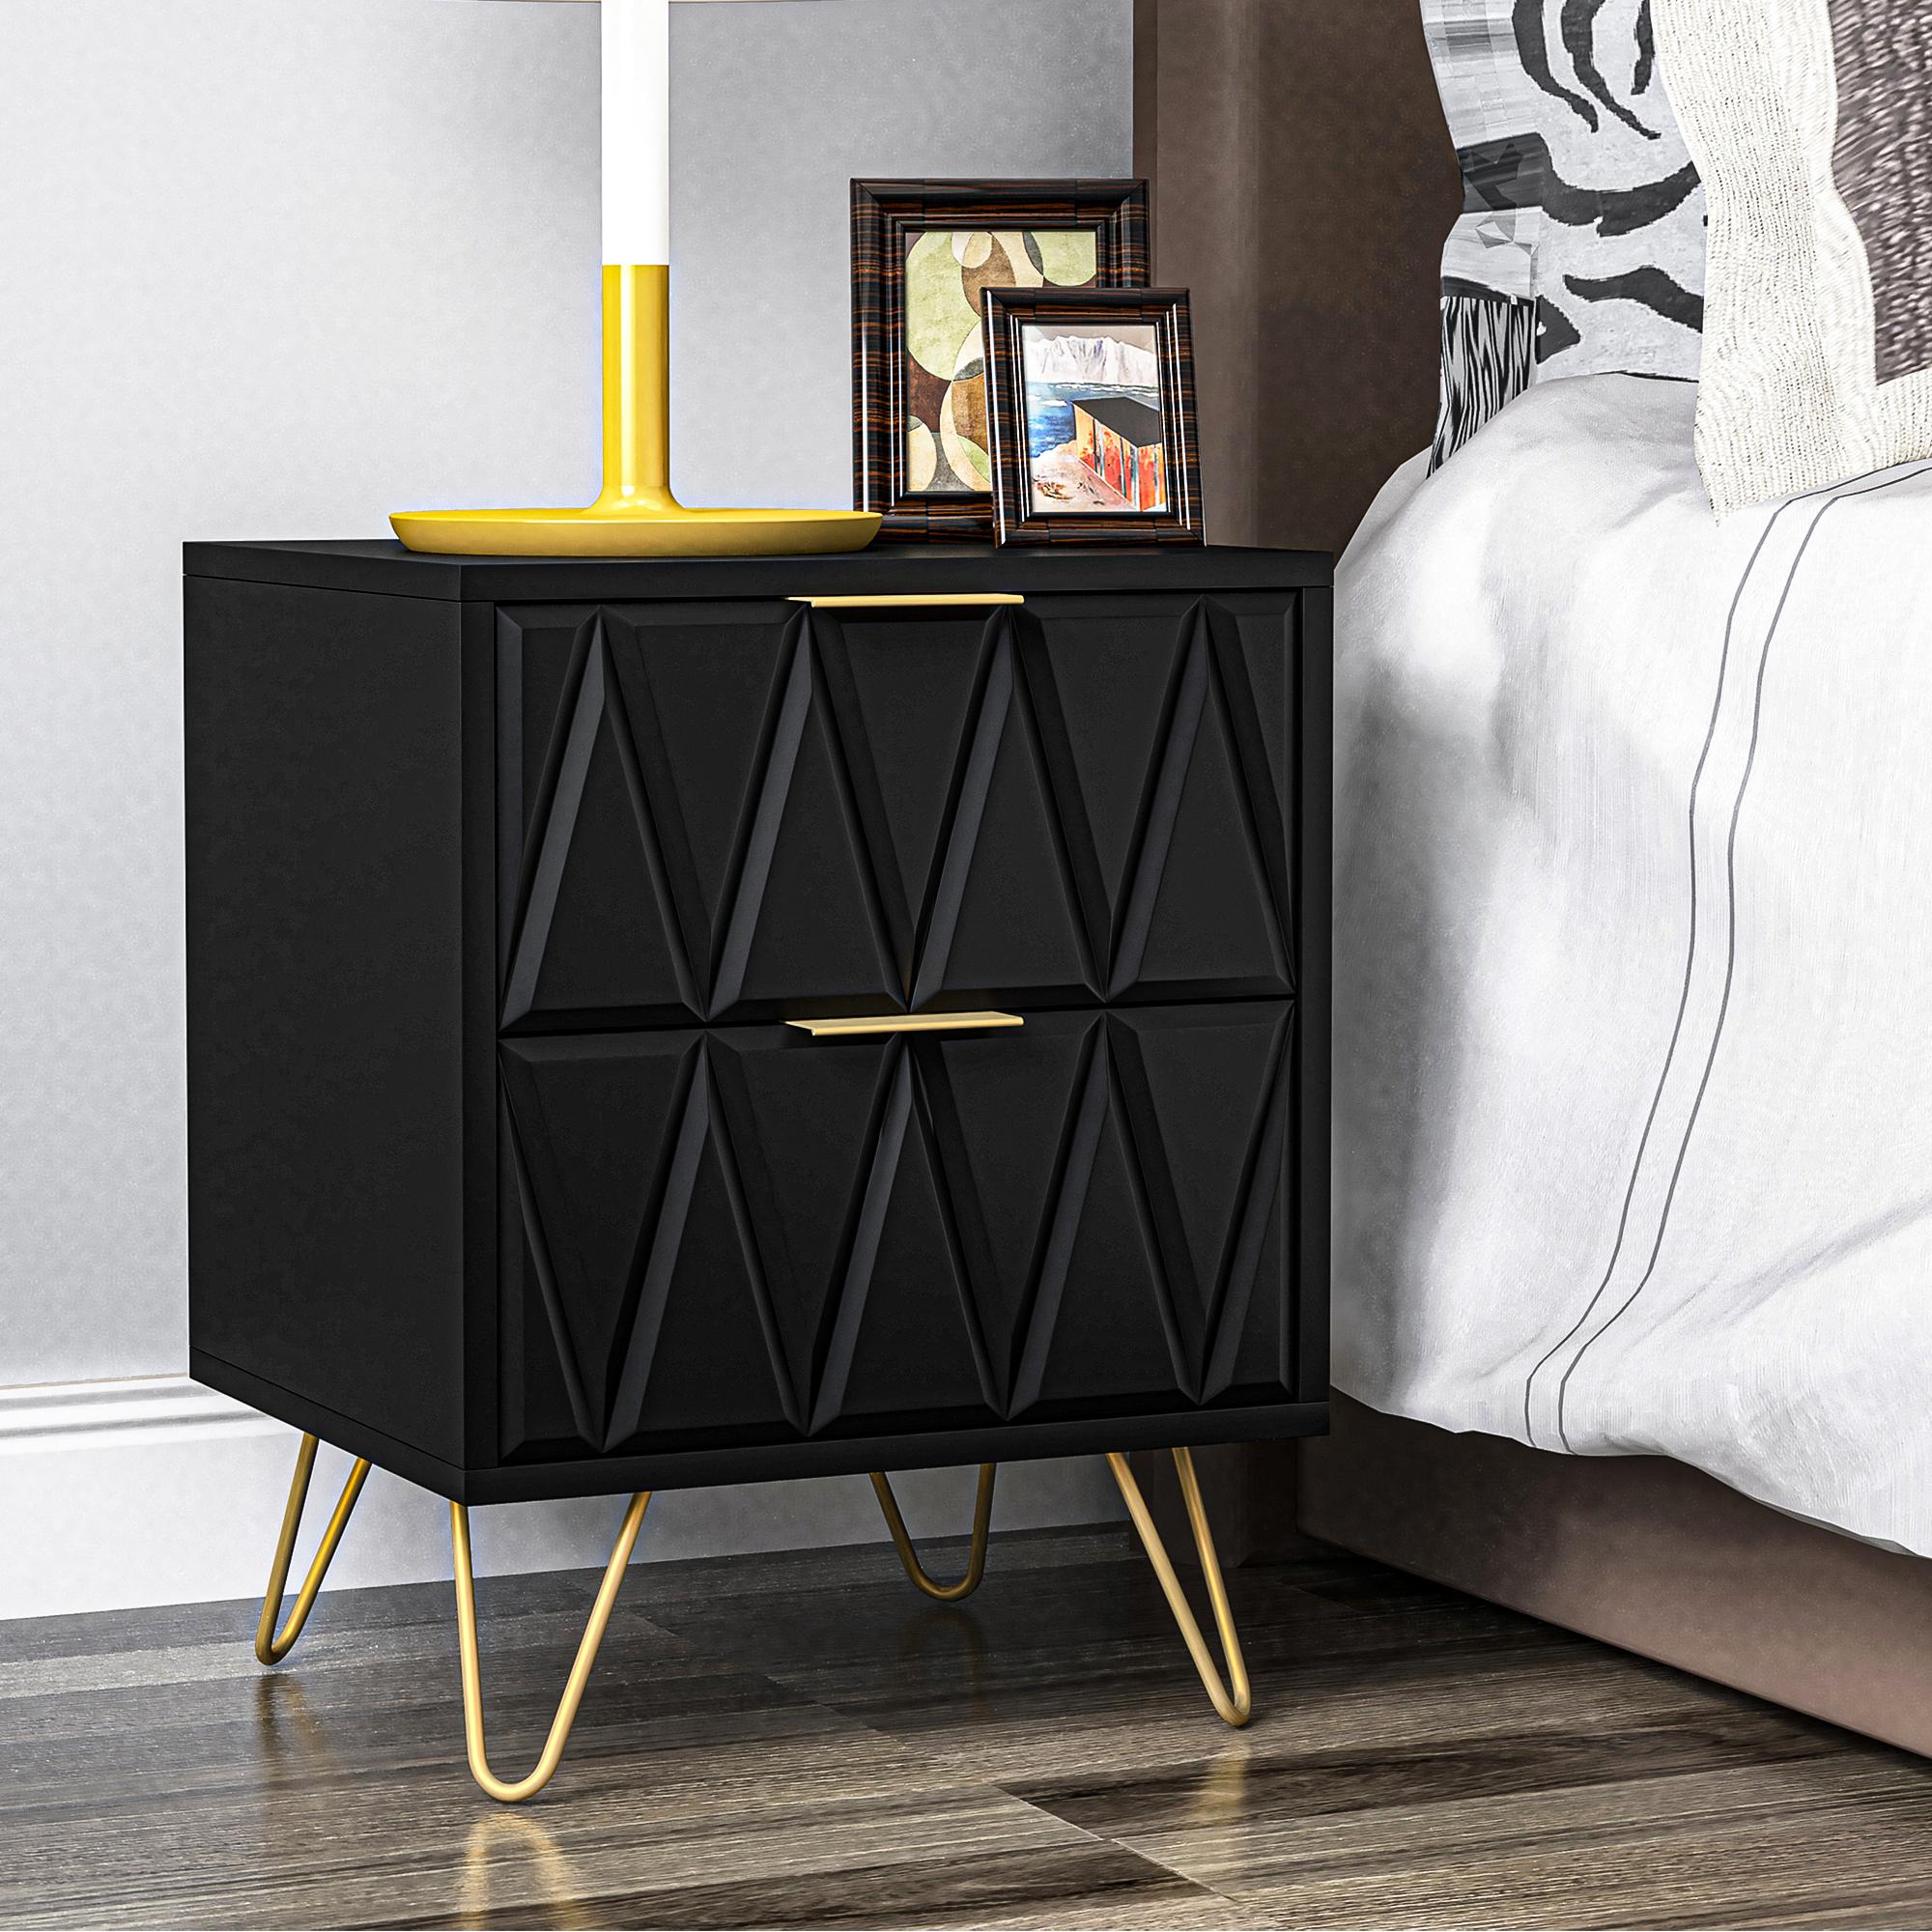 

Black Nightstand, Modern Bedside Table With 2 Drawers For Bedroom, End Side Table Night Stand With Gold Legs For Living Room